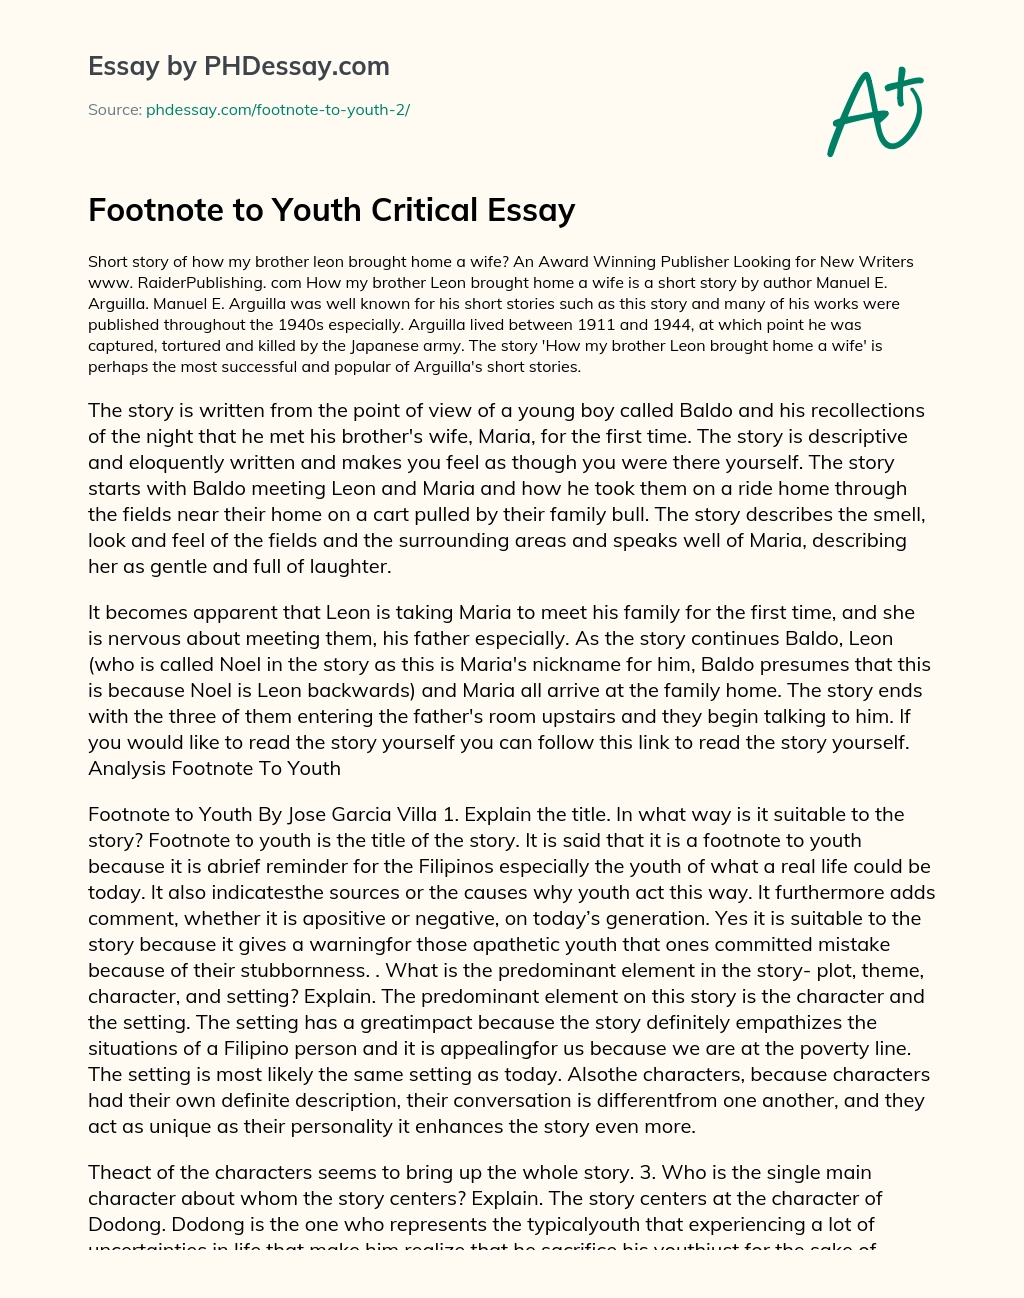 Footnote to Youth Critical Essay essay